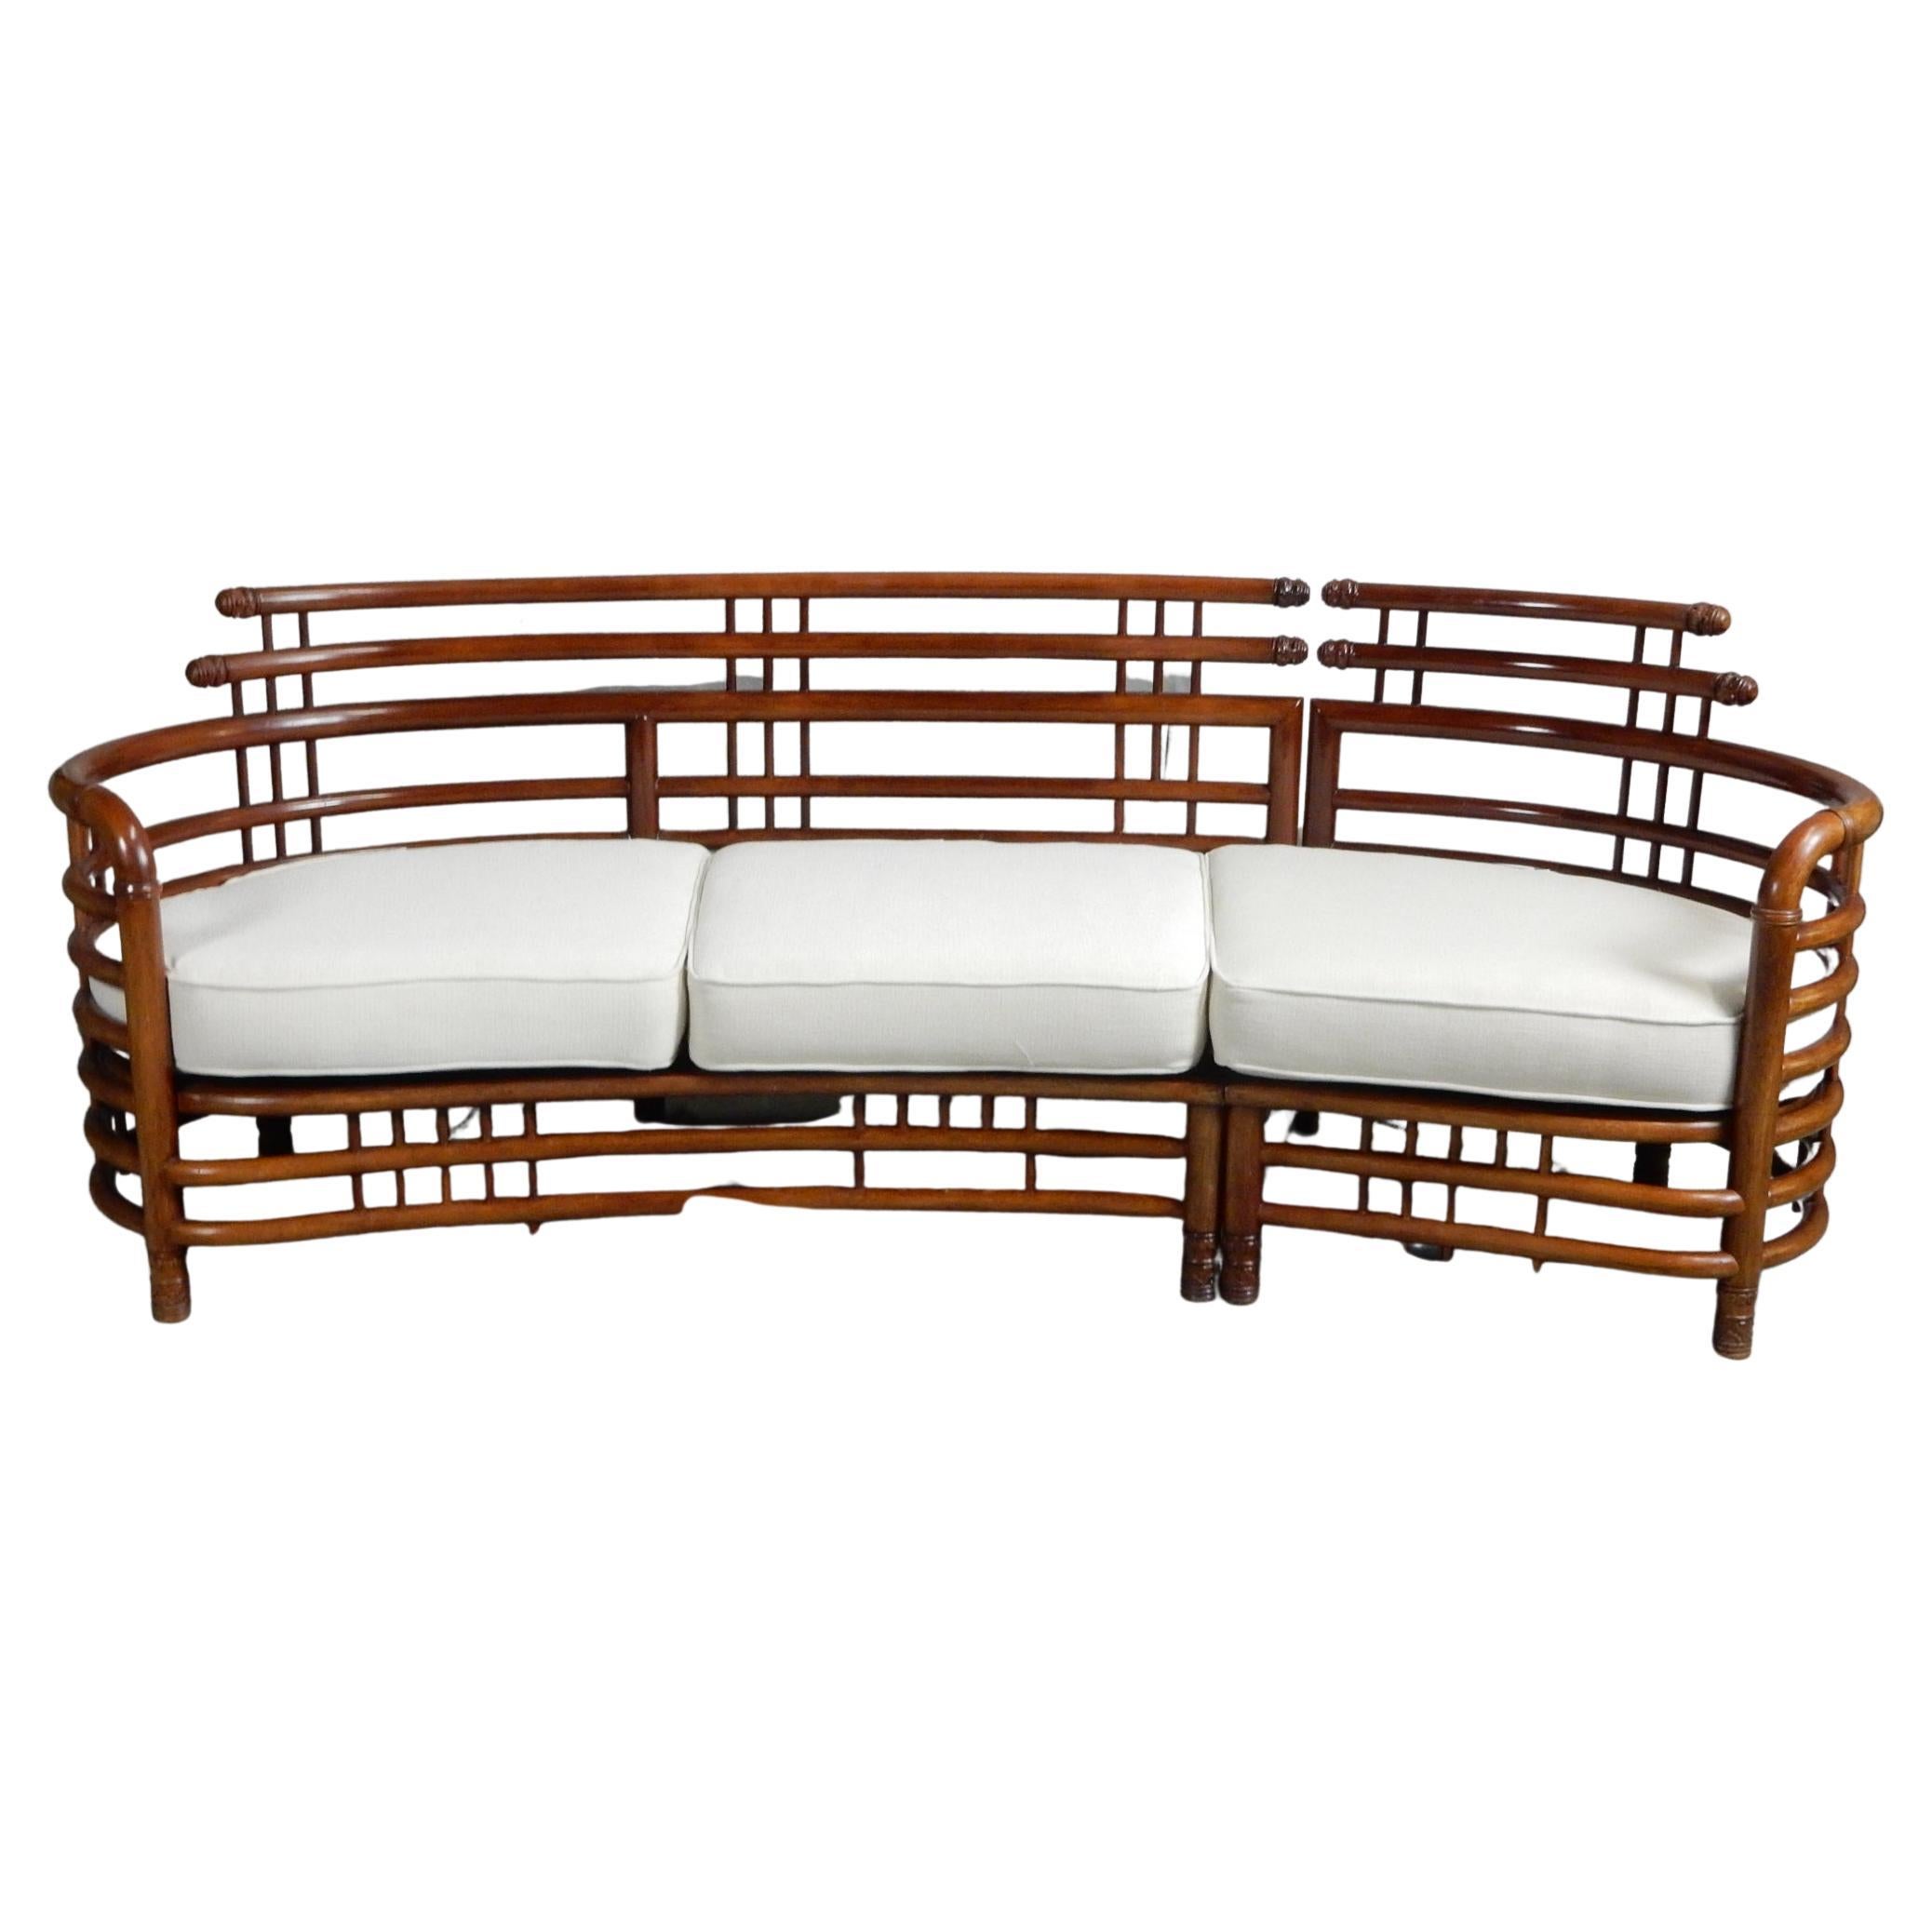 Aesthetically pleasing sculpted Teakwood birdcage sofa.
Circa 1950's, South Asia. Heavy and well crafted piece of furniture.
Newly upholstered cushions. No damage or repairs.
Bolts together under the left side allowing it be 2 separate pieces.
This